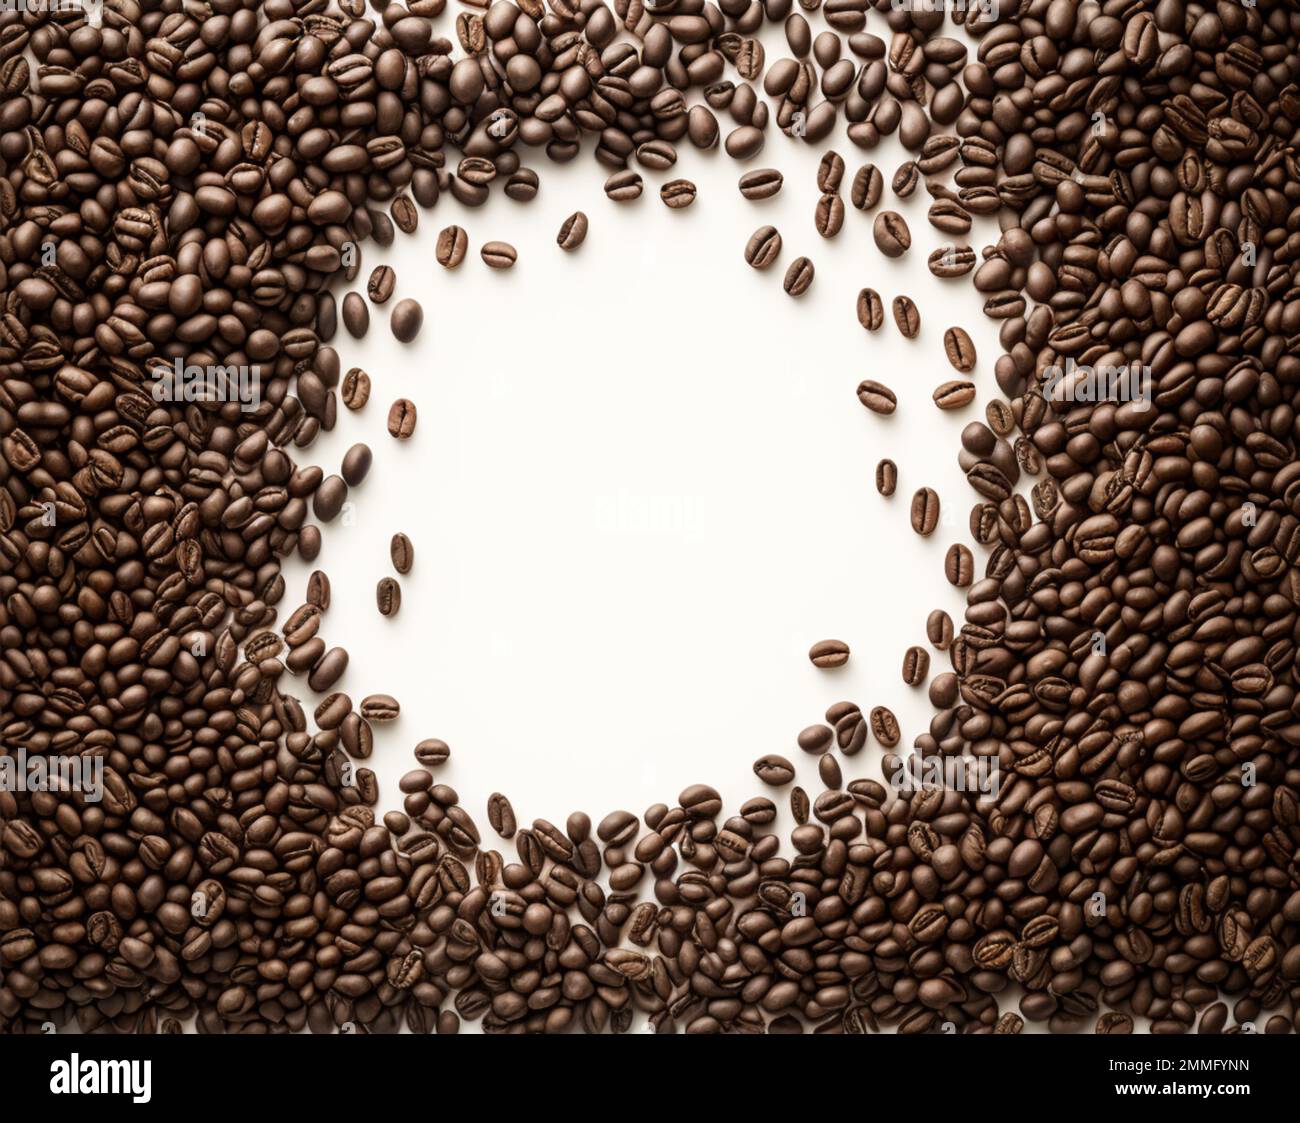 coffee beans isolated on a white background with a blank copy space in the middle represents the rich, bold flavor of the beloved beverage Stock Photo